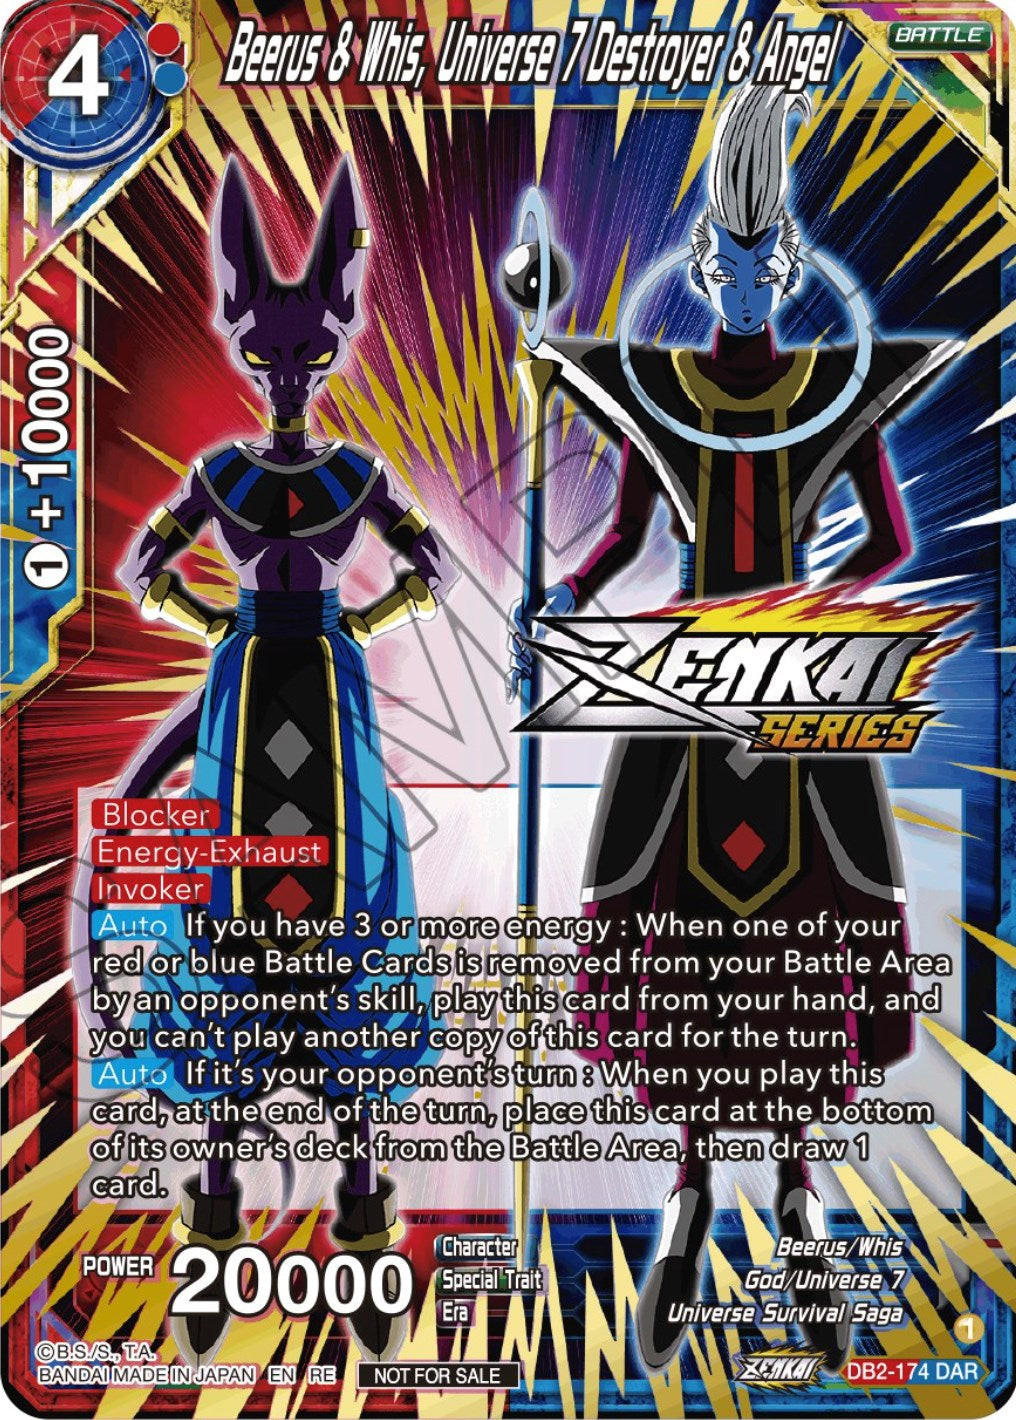 Beerus & Whis, Universe 7 Destroyer & Angel (Event Pack 12) (DB2-174) [Tournament Promotion Cards] | Gauntlet Hobbies - Angola